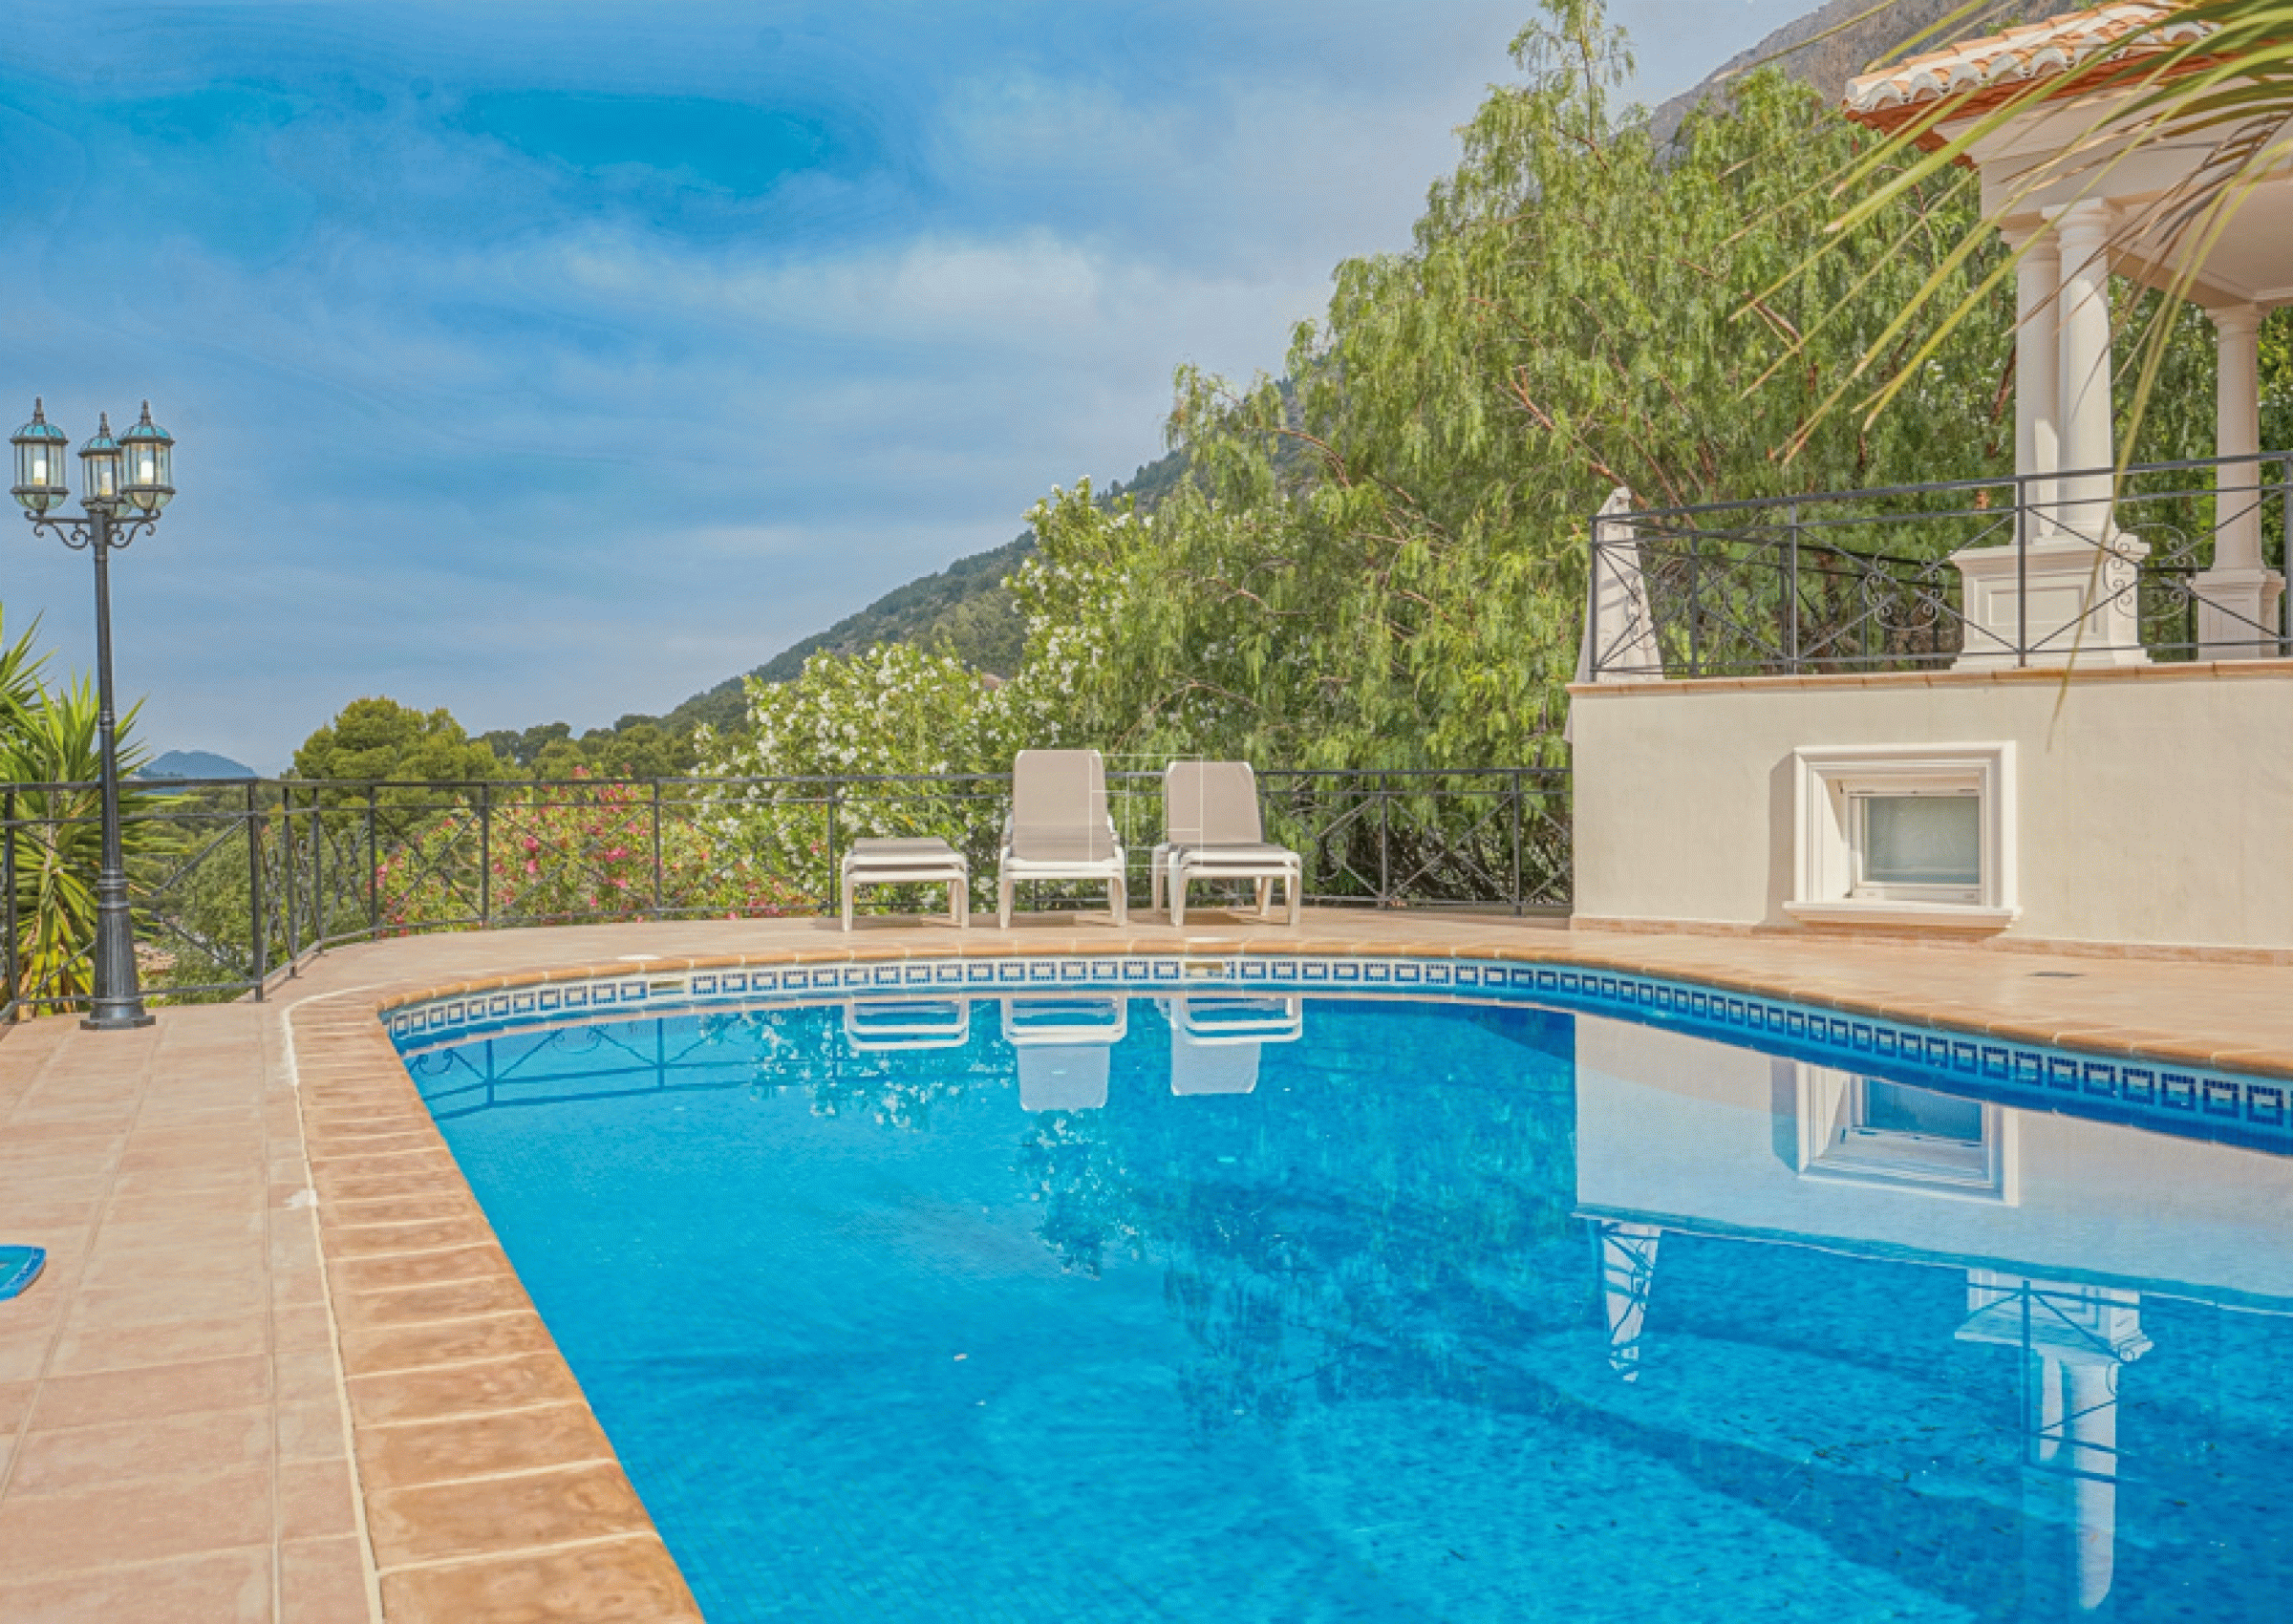 6 bed traditional villa with panoramic views in Javea